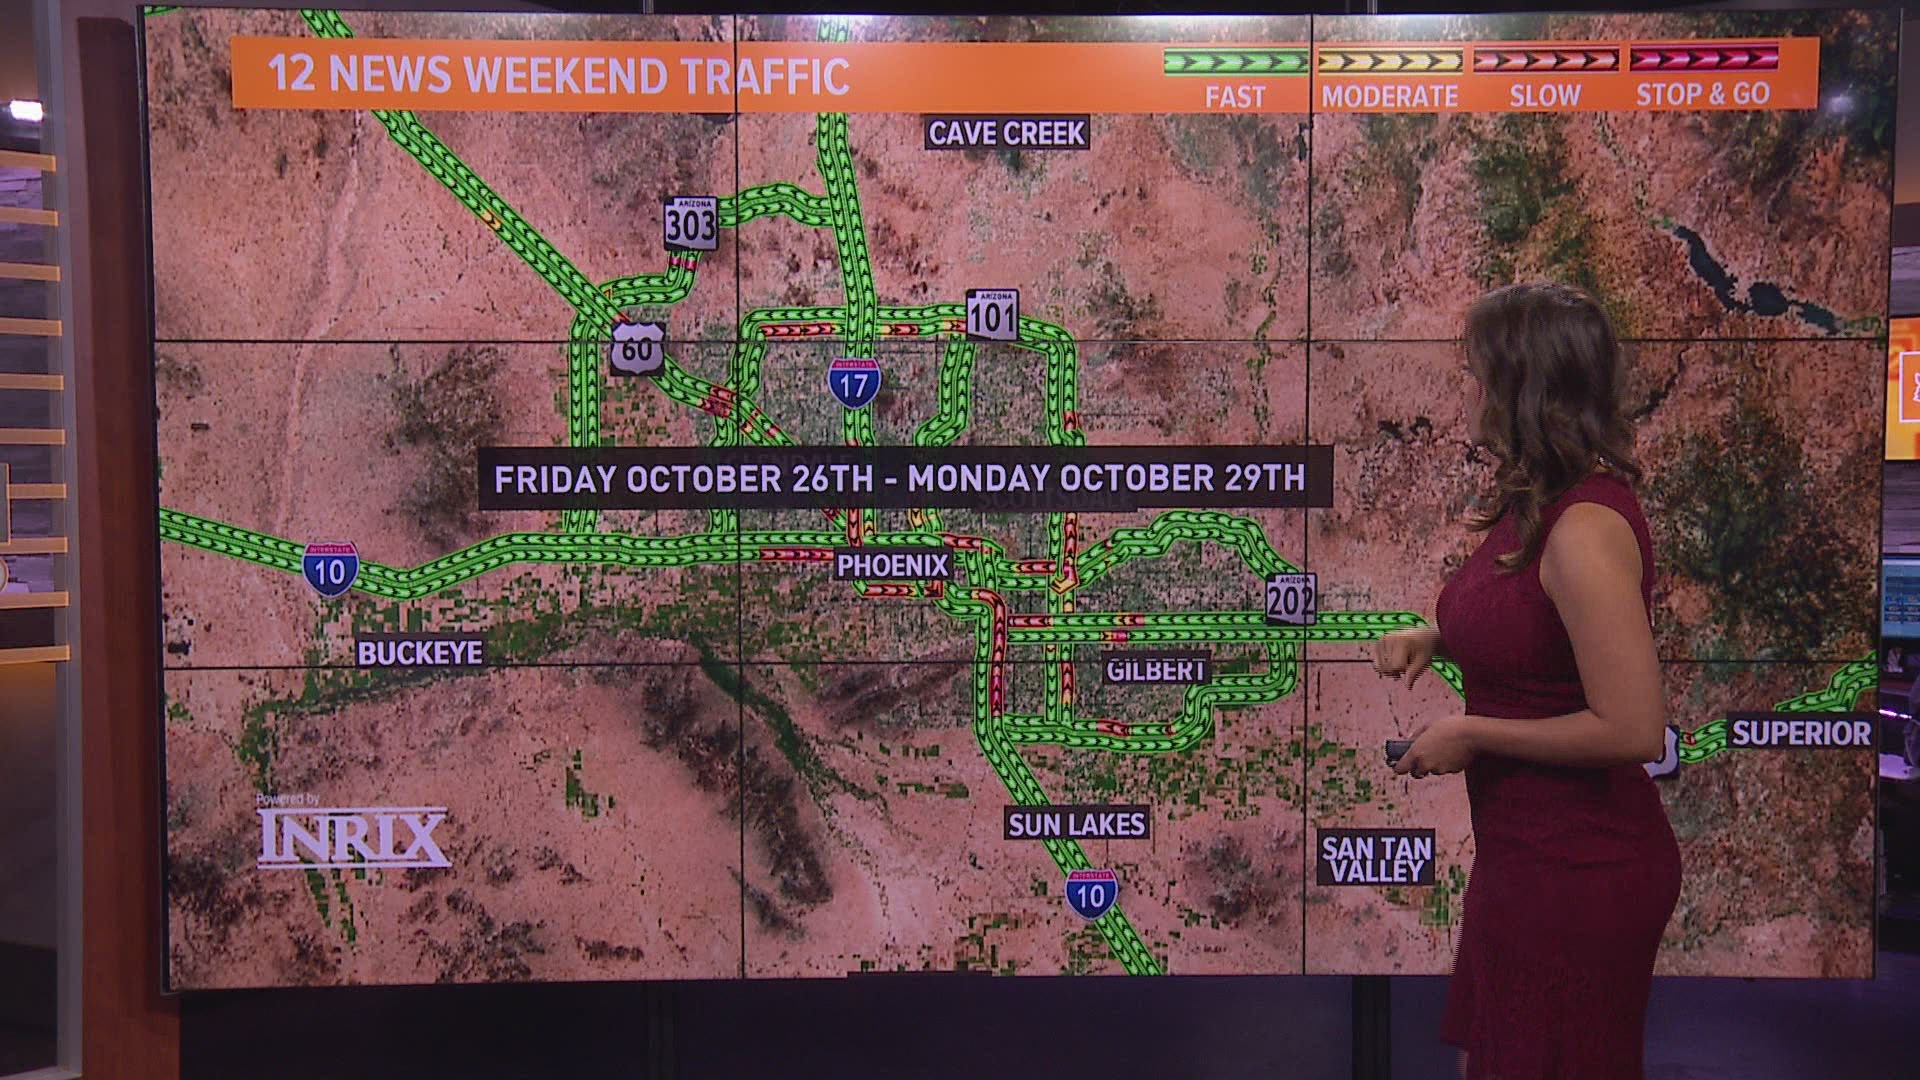 Here's your weekend traffic outlook for October 26-28 with some major closures causing delays.